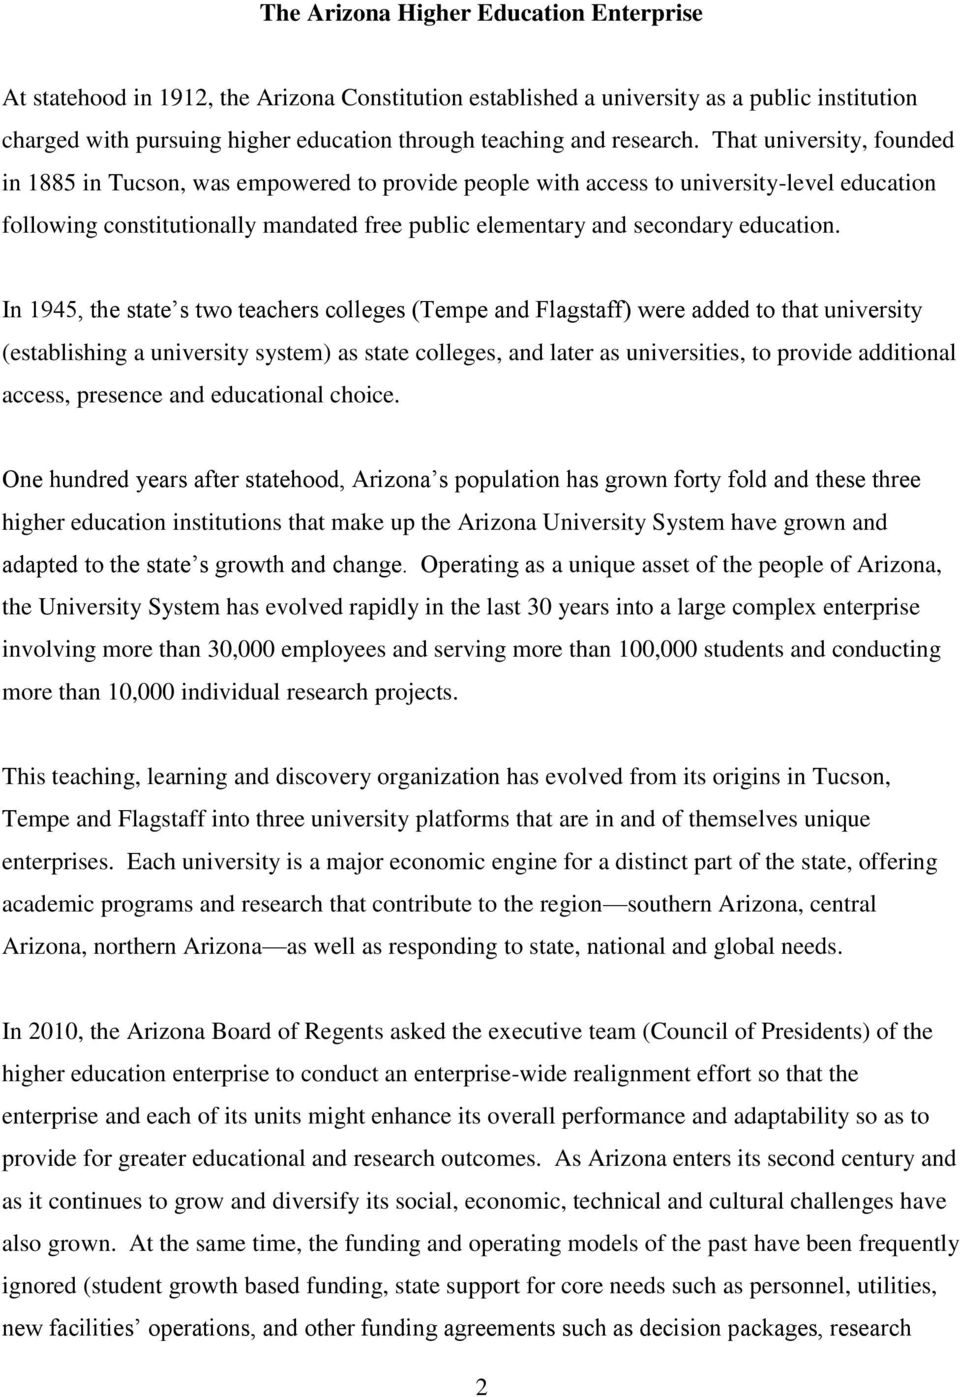 That university, founded in 1885 in Tucson, was empowered to provide people with access to university-level education following constitutionally mandated free public elementary and secondary